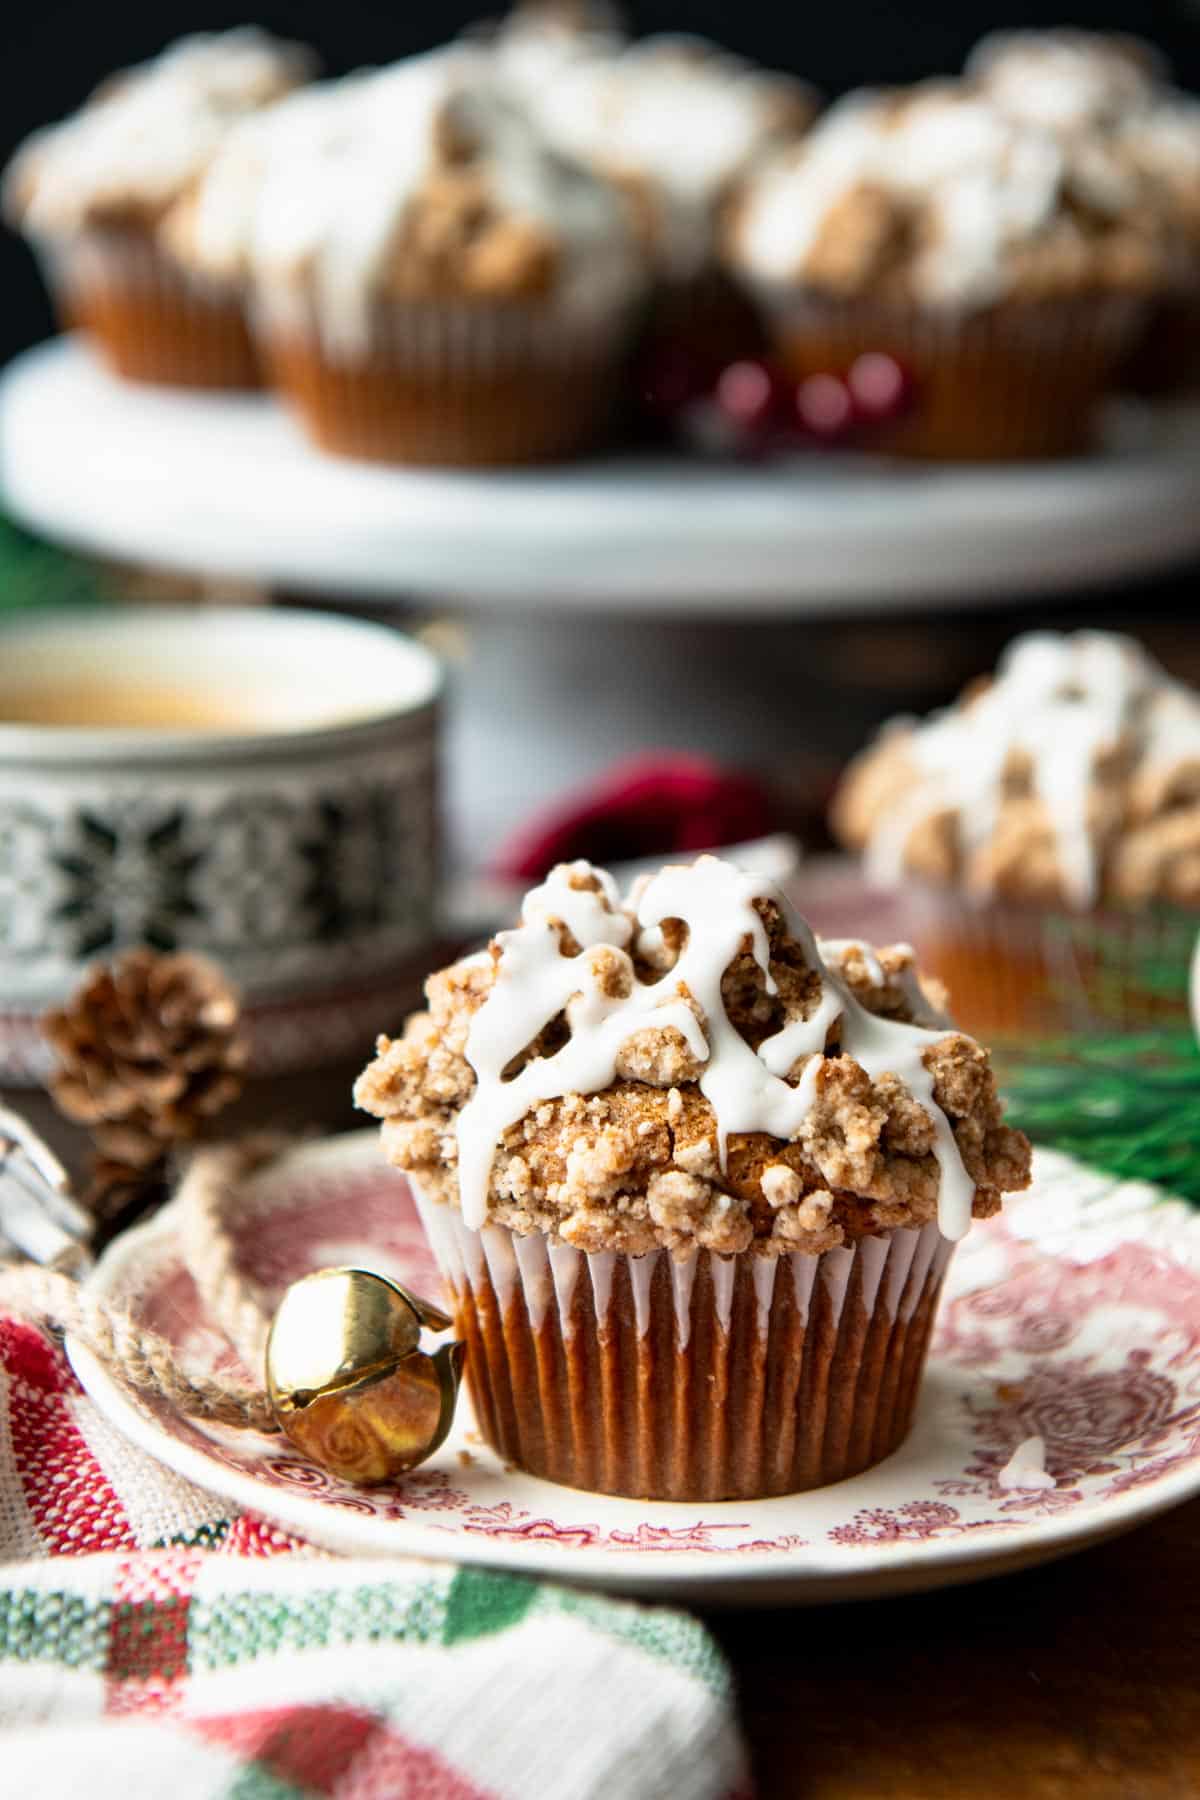 Gingerbread muffins with holiday decorations on a breakfast table.